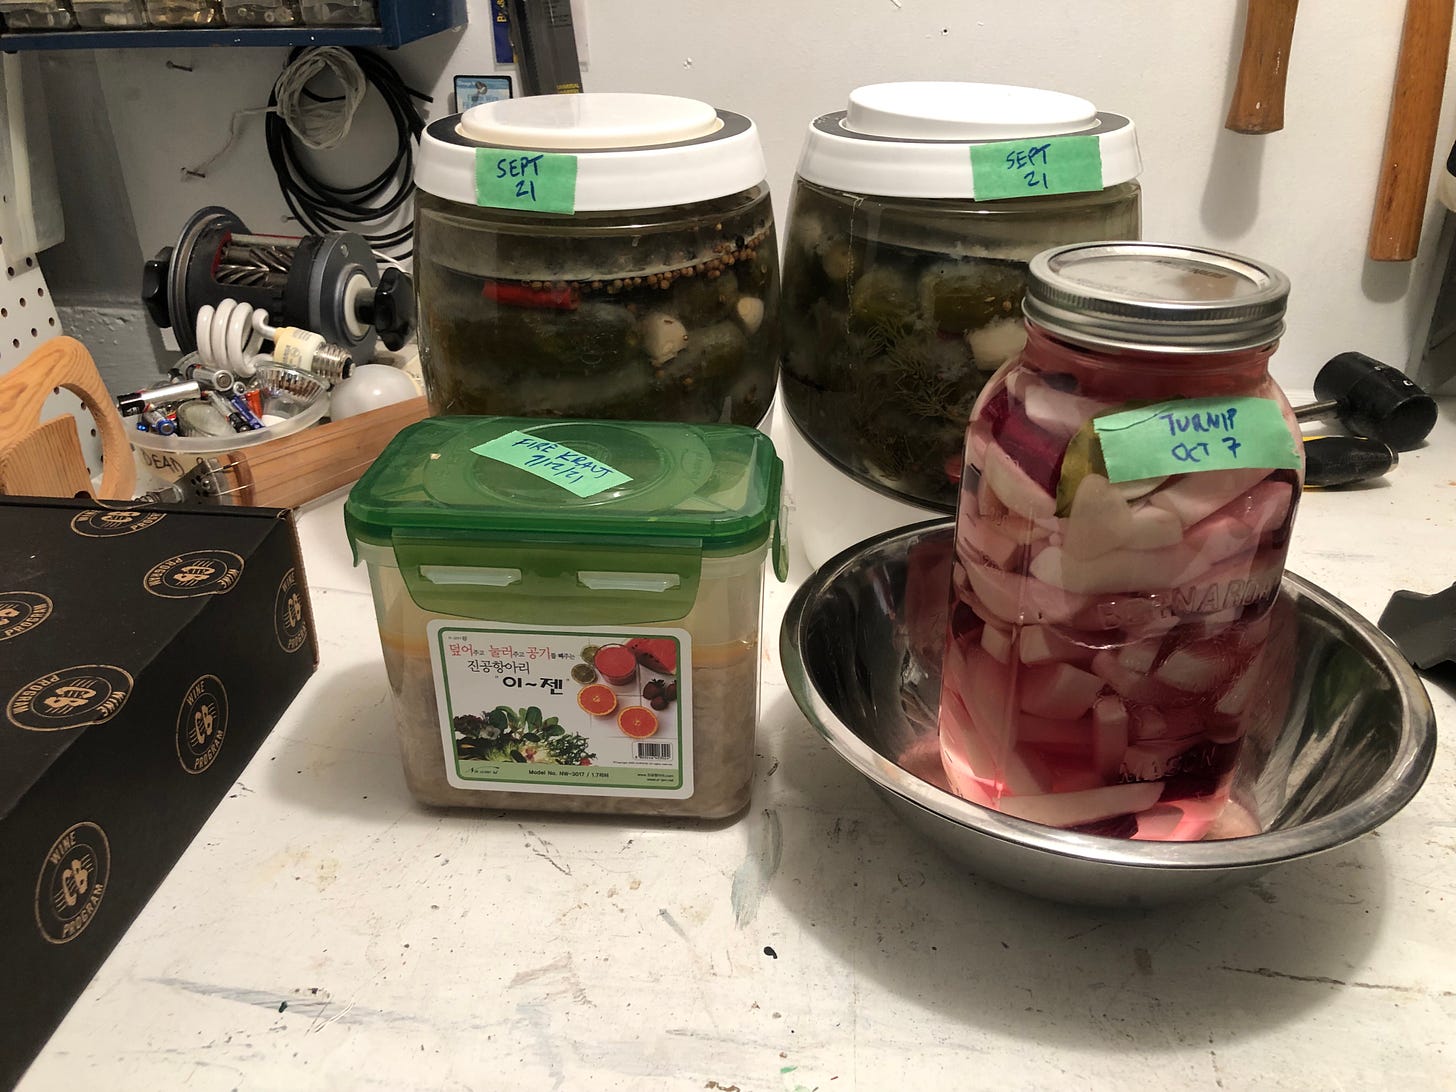 Two crocks with full-sour pickles, a large jar with pink pickled turnips, and a Korean pickling container holding sauerkraut